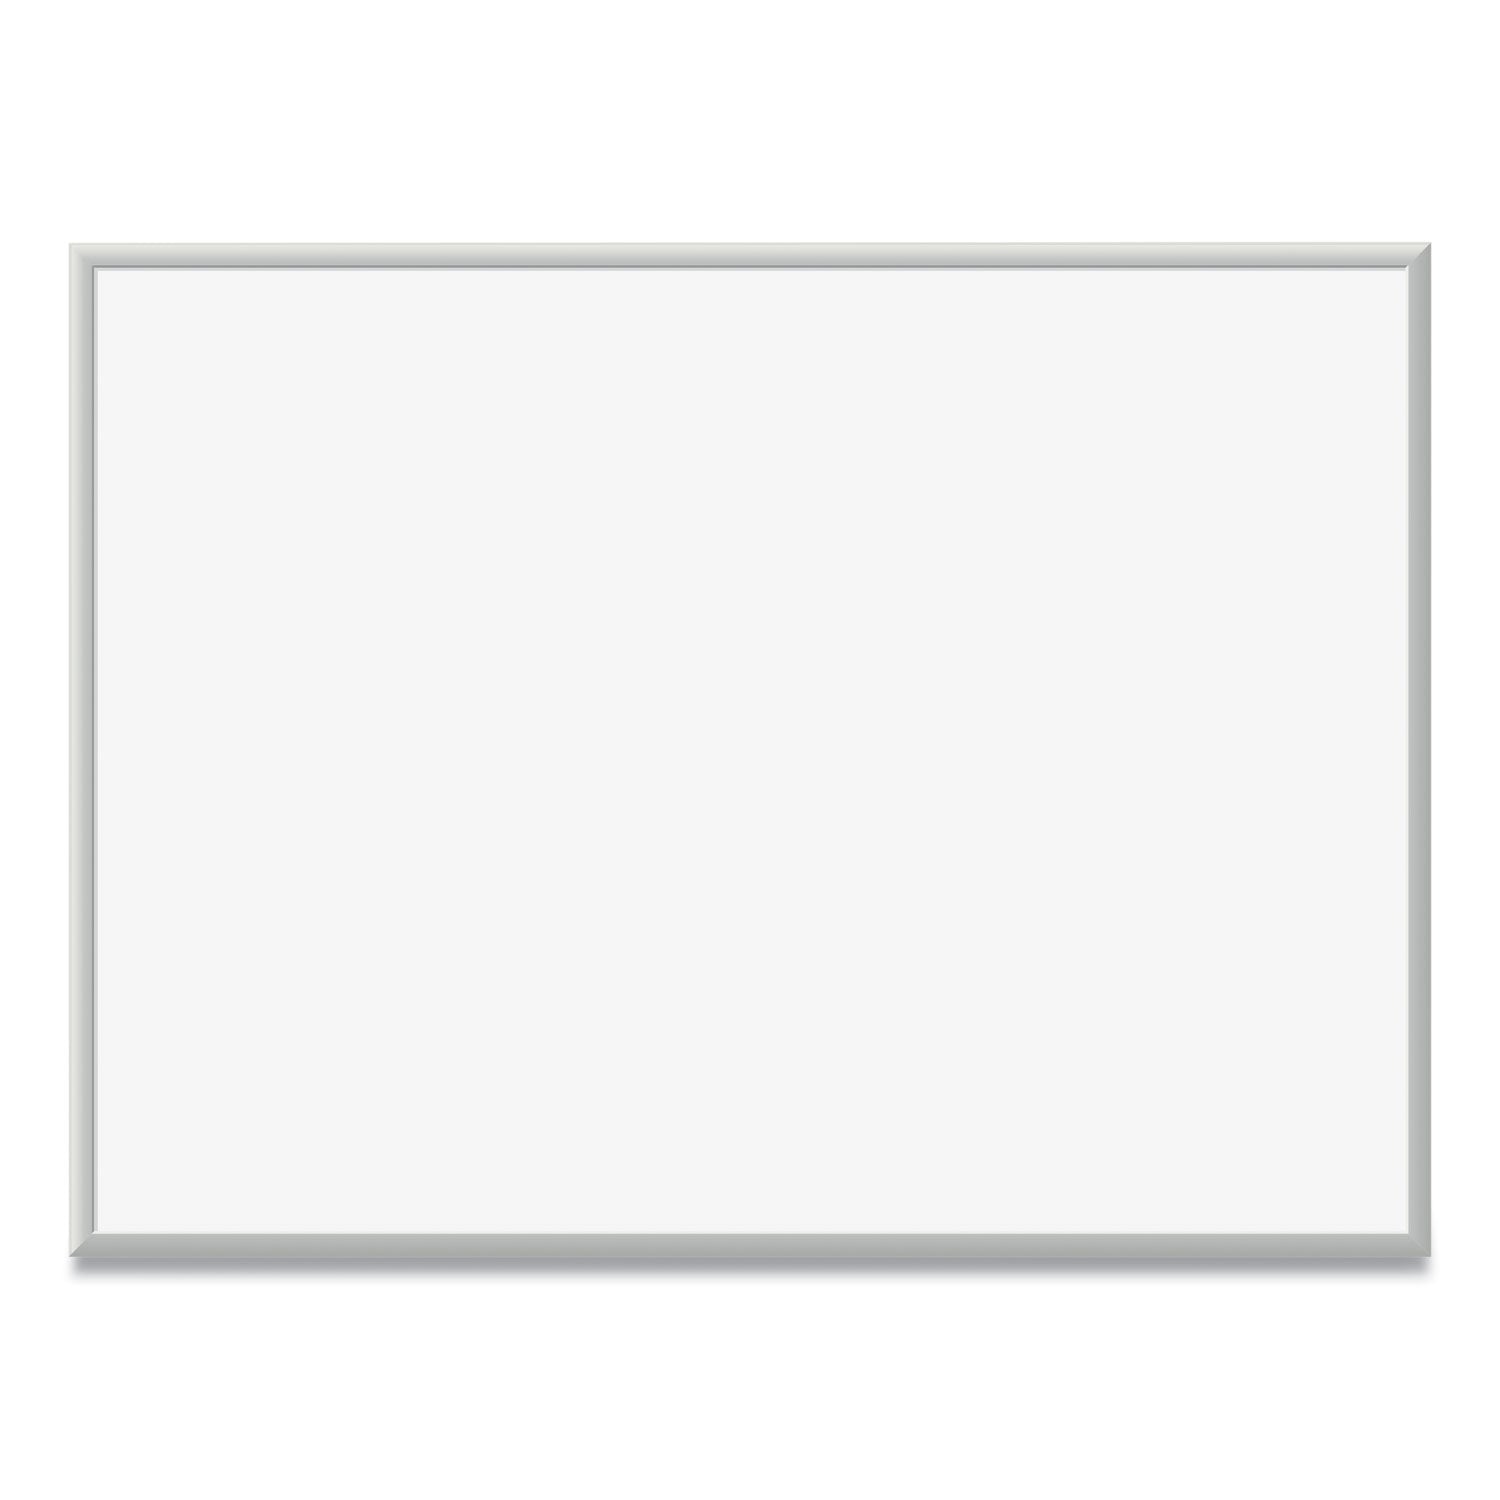 magnetic-dry-erase-board-with-aluminum-frame-47-x-35-white-surface-silver-frame_ubr072u0001 - 1